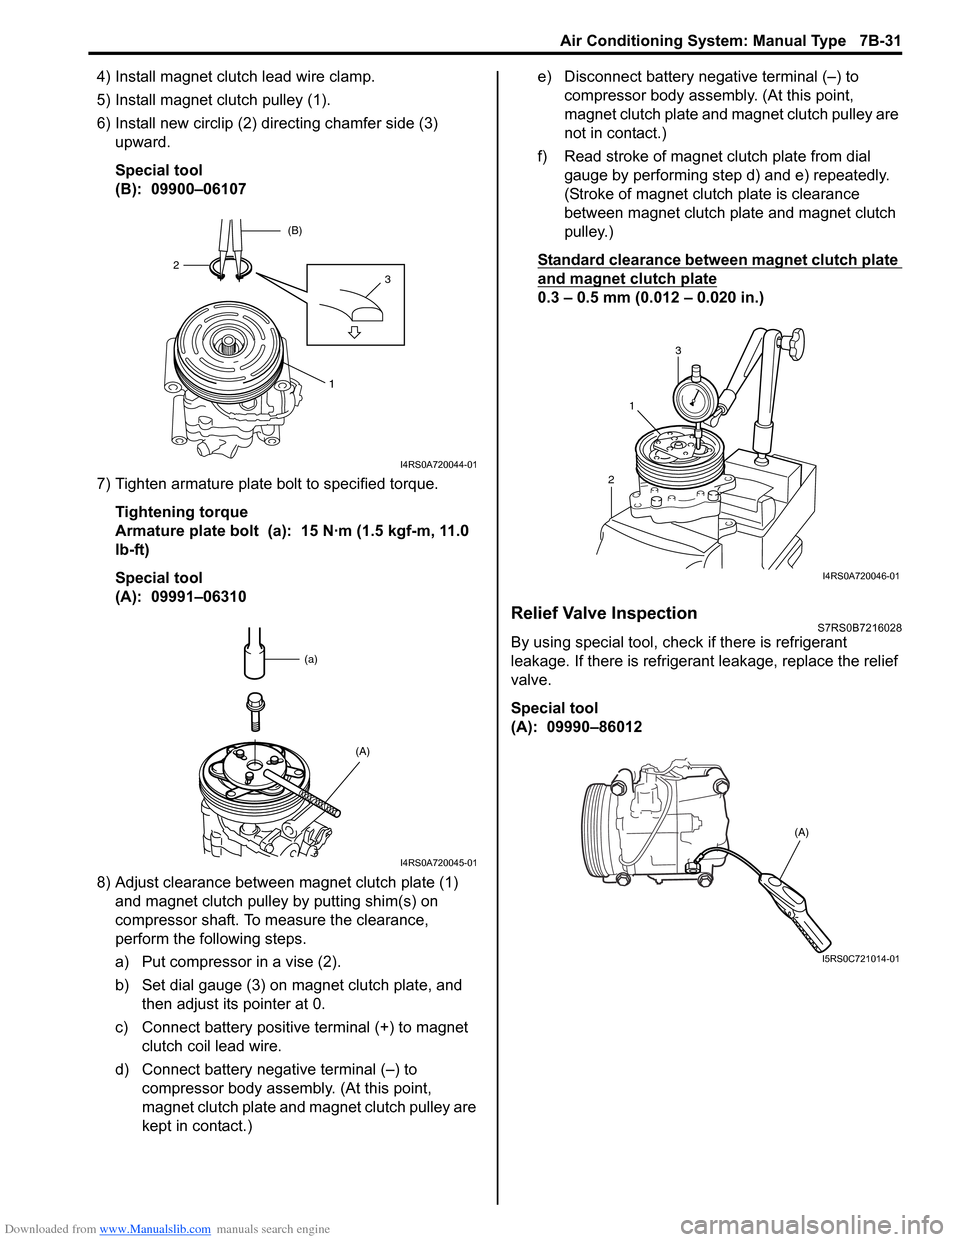 SUZUKI SWIFT 2006 2.G Service Workshop Manual Downloaded from www.Manualslib.com manuals search engine Air Conditioning System: Manual Type 7B-31
4) Install magnet clutch lead wire clamp.
5) Install magnet clutch pulley (1).
6) Install new circli